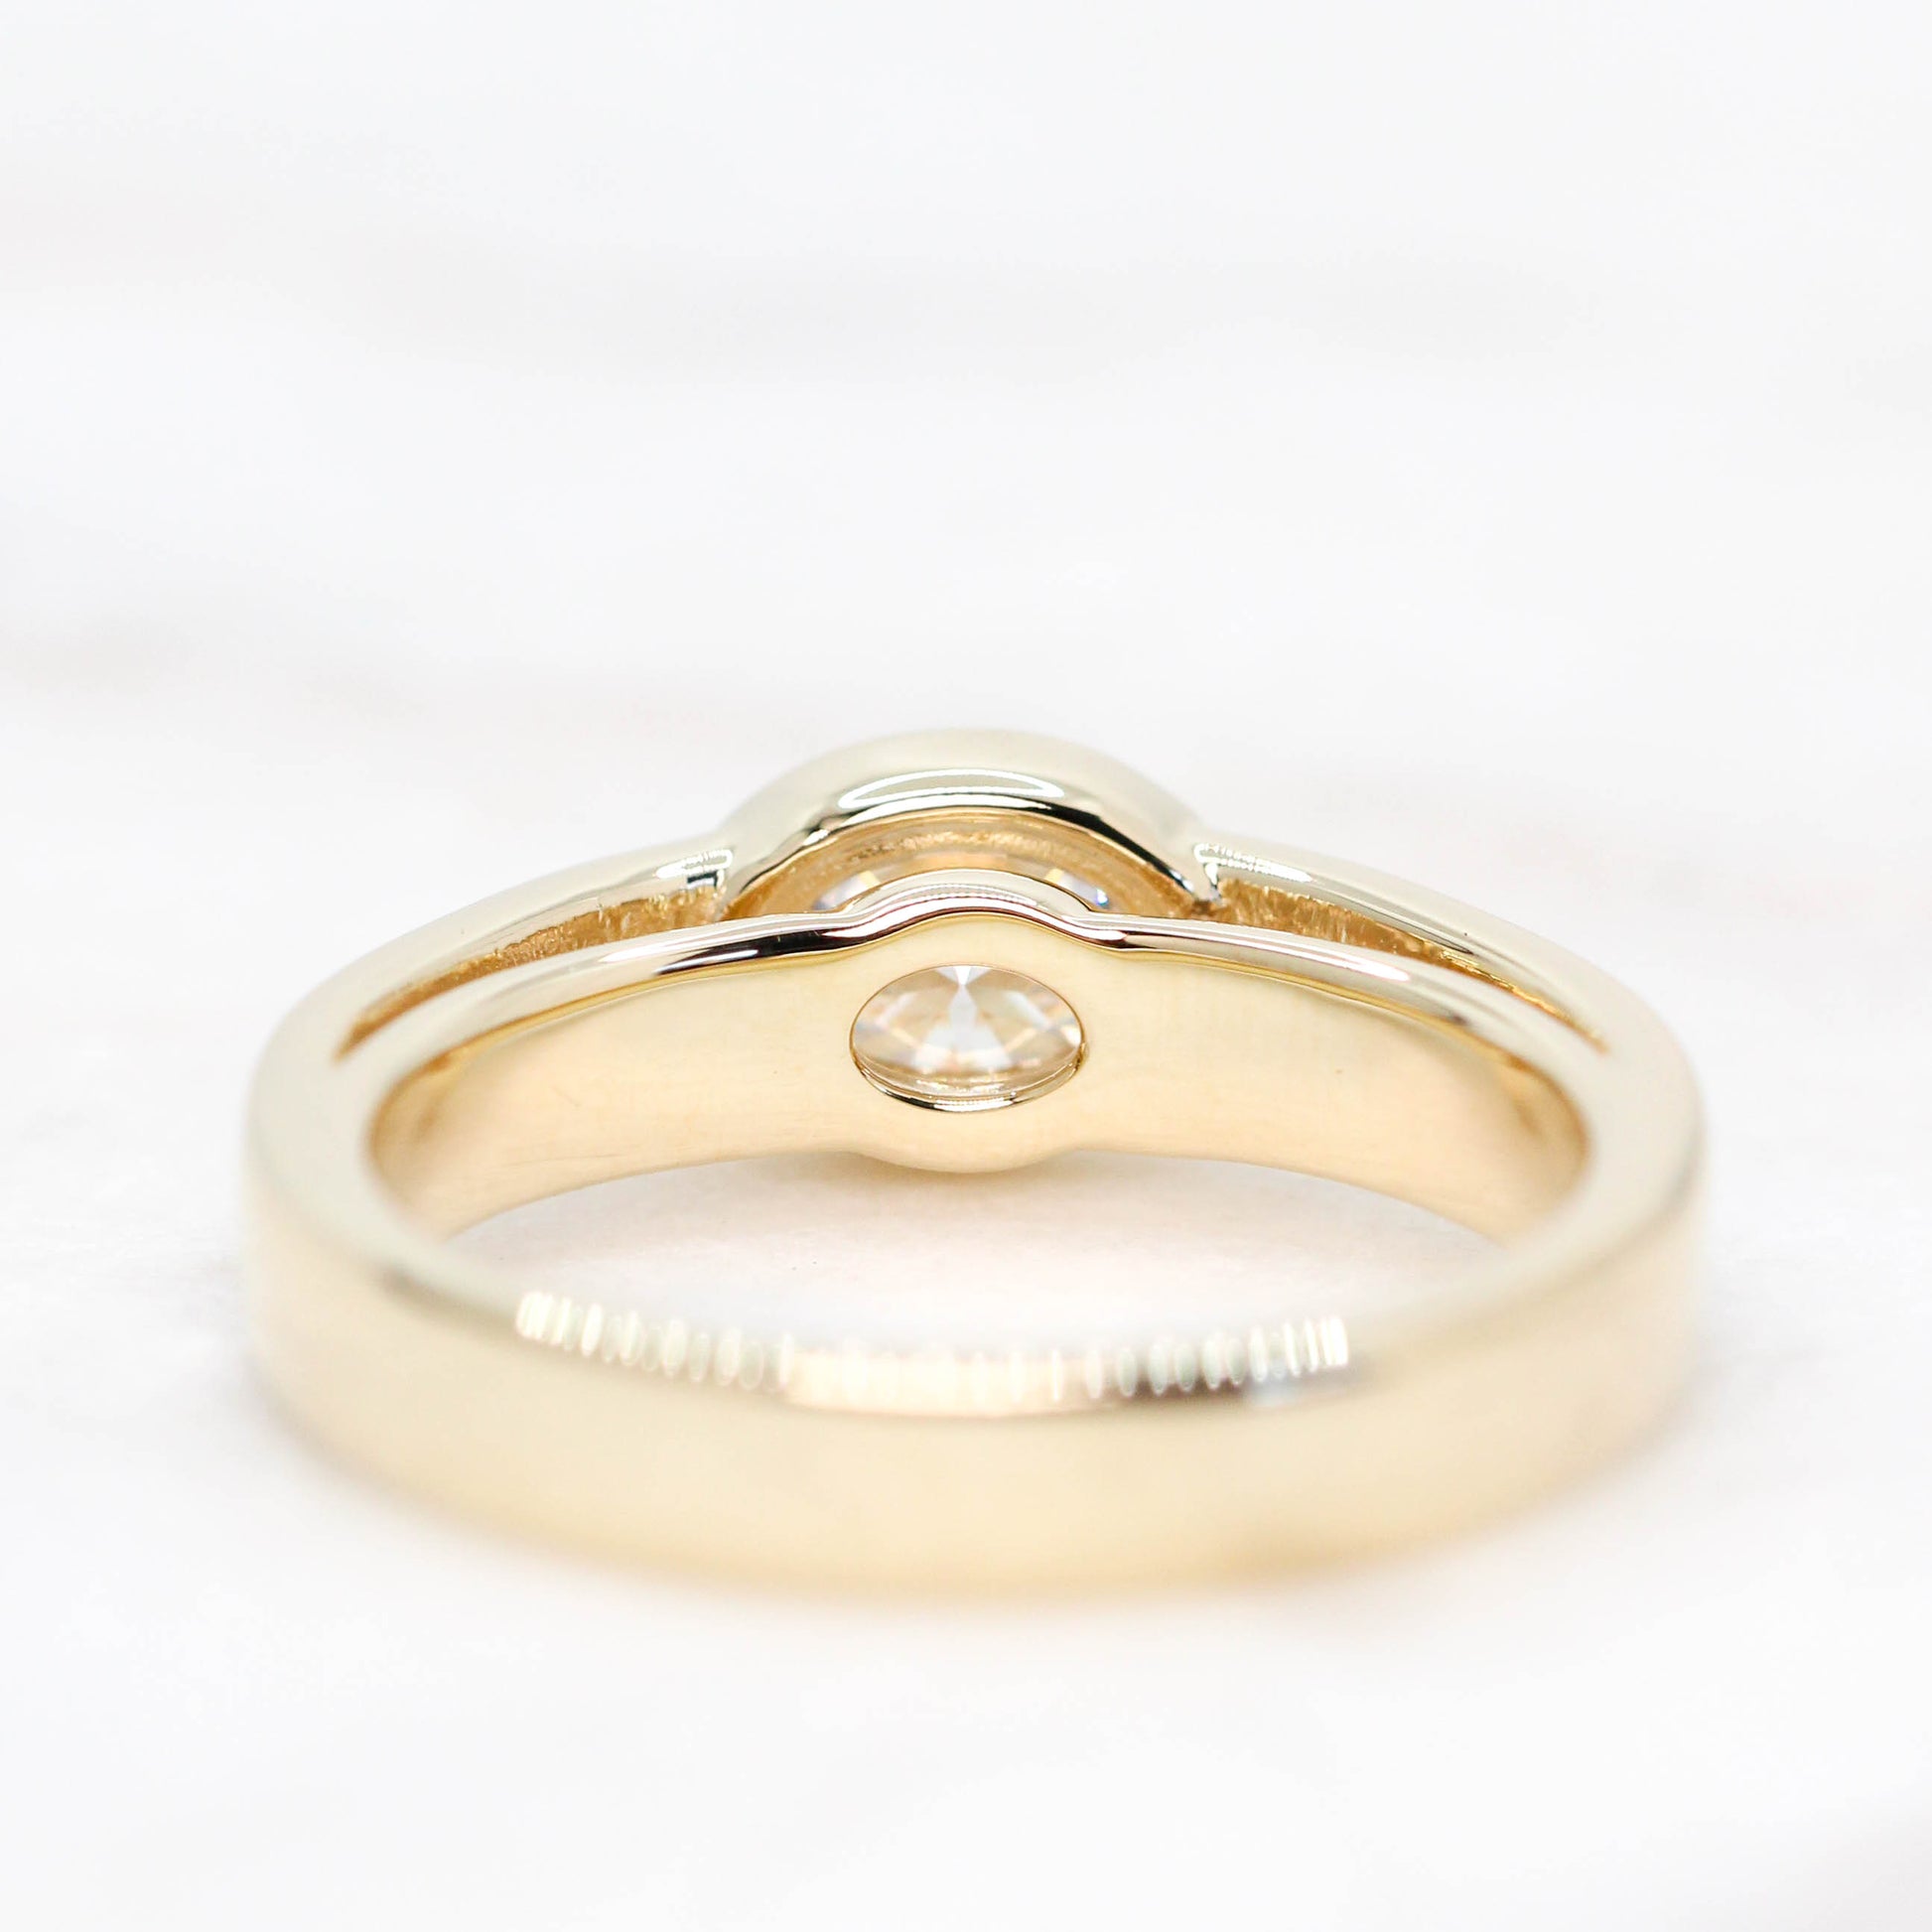 *NEED TO PHOTO BRUSHED* Mabel Ring with a 0.84 Carat Oval Moissanite - Made to Order, Choose Your Gold Tone - Midwinter Co. Alternative Bridal Rings and Modern Fine Jewelry